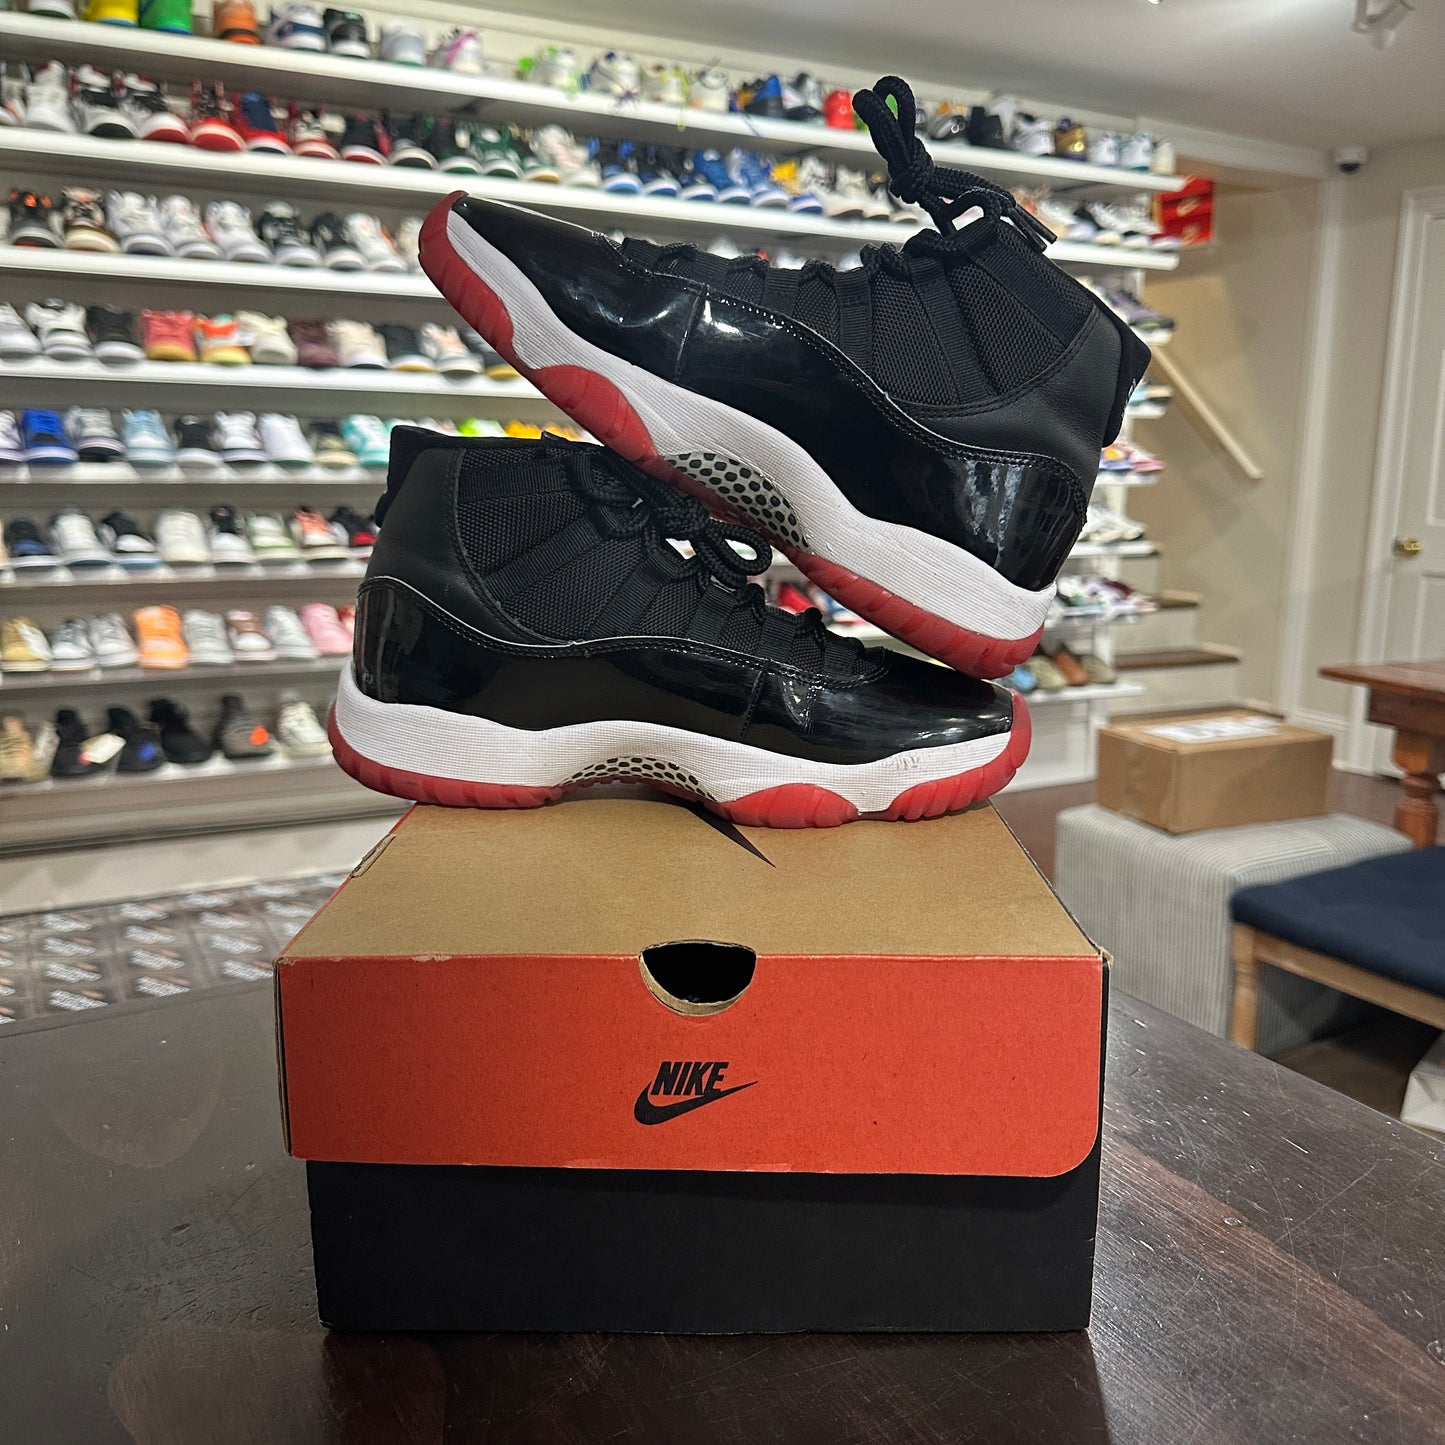 *USED* Air Jordan 11 Playoff Bred (2019) (size 8)